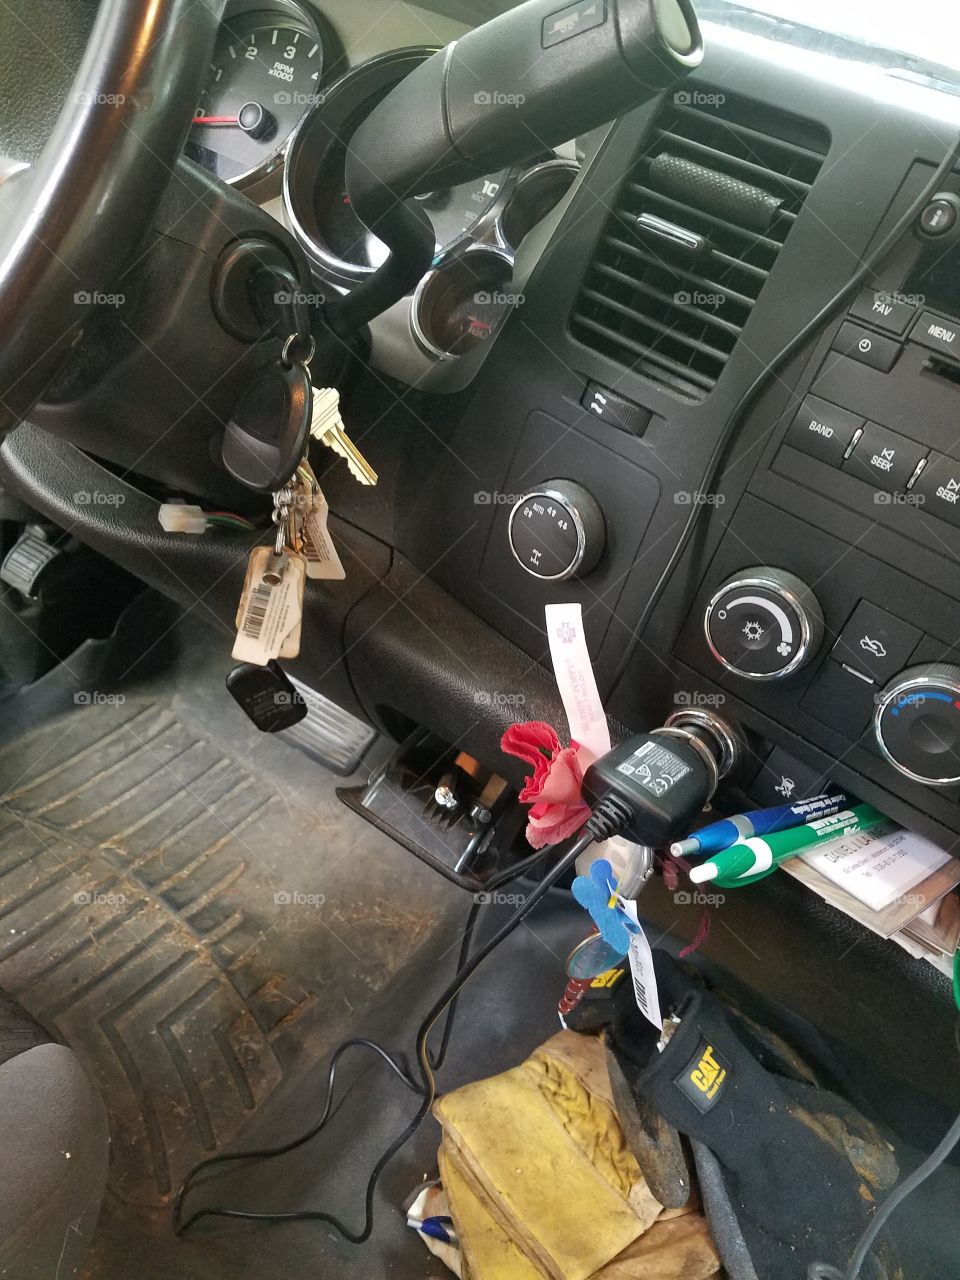 Working Mans truck front seat with keys in ignition ready to go.